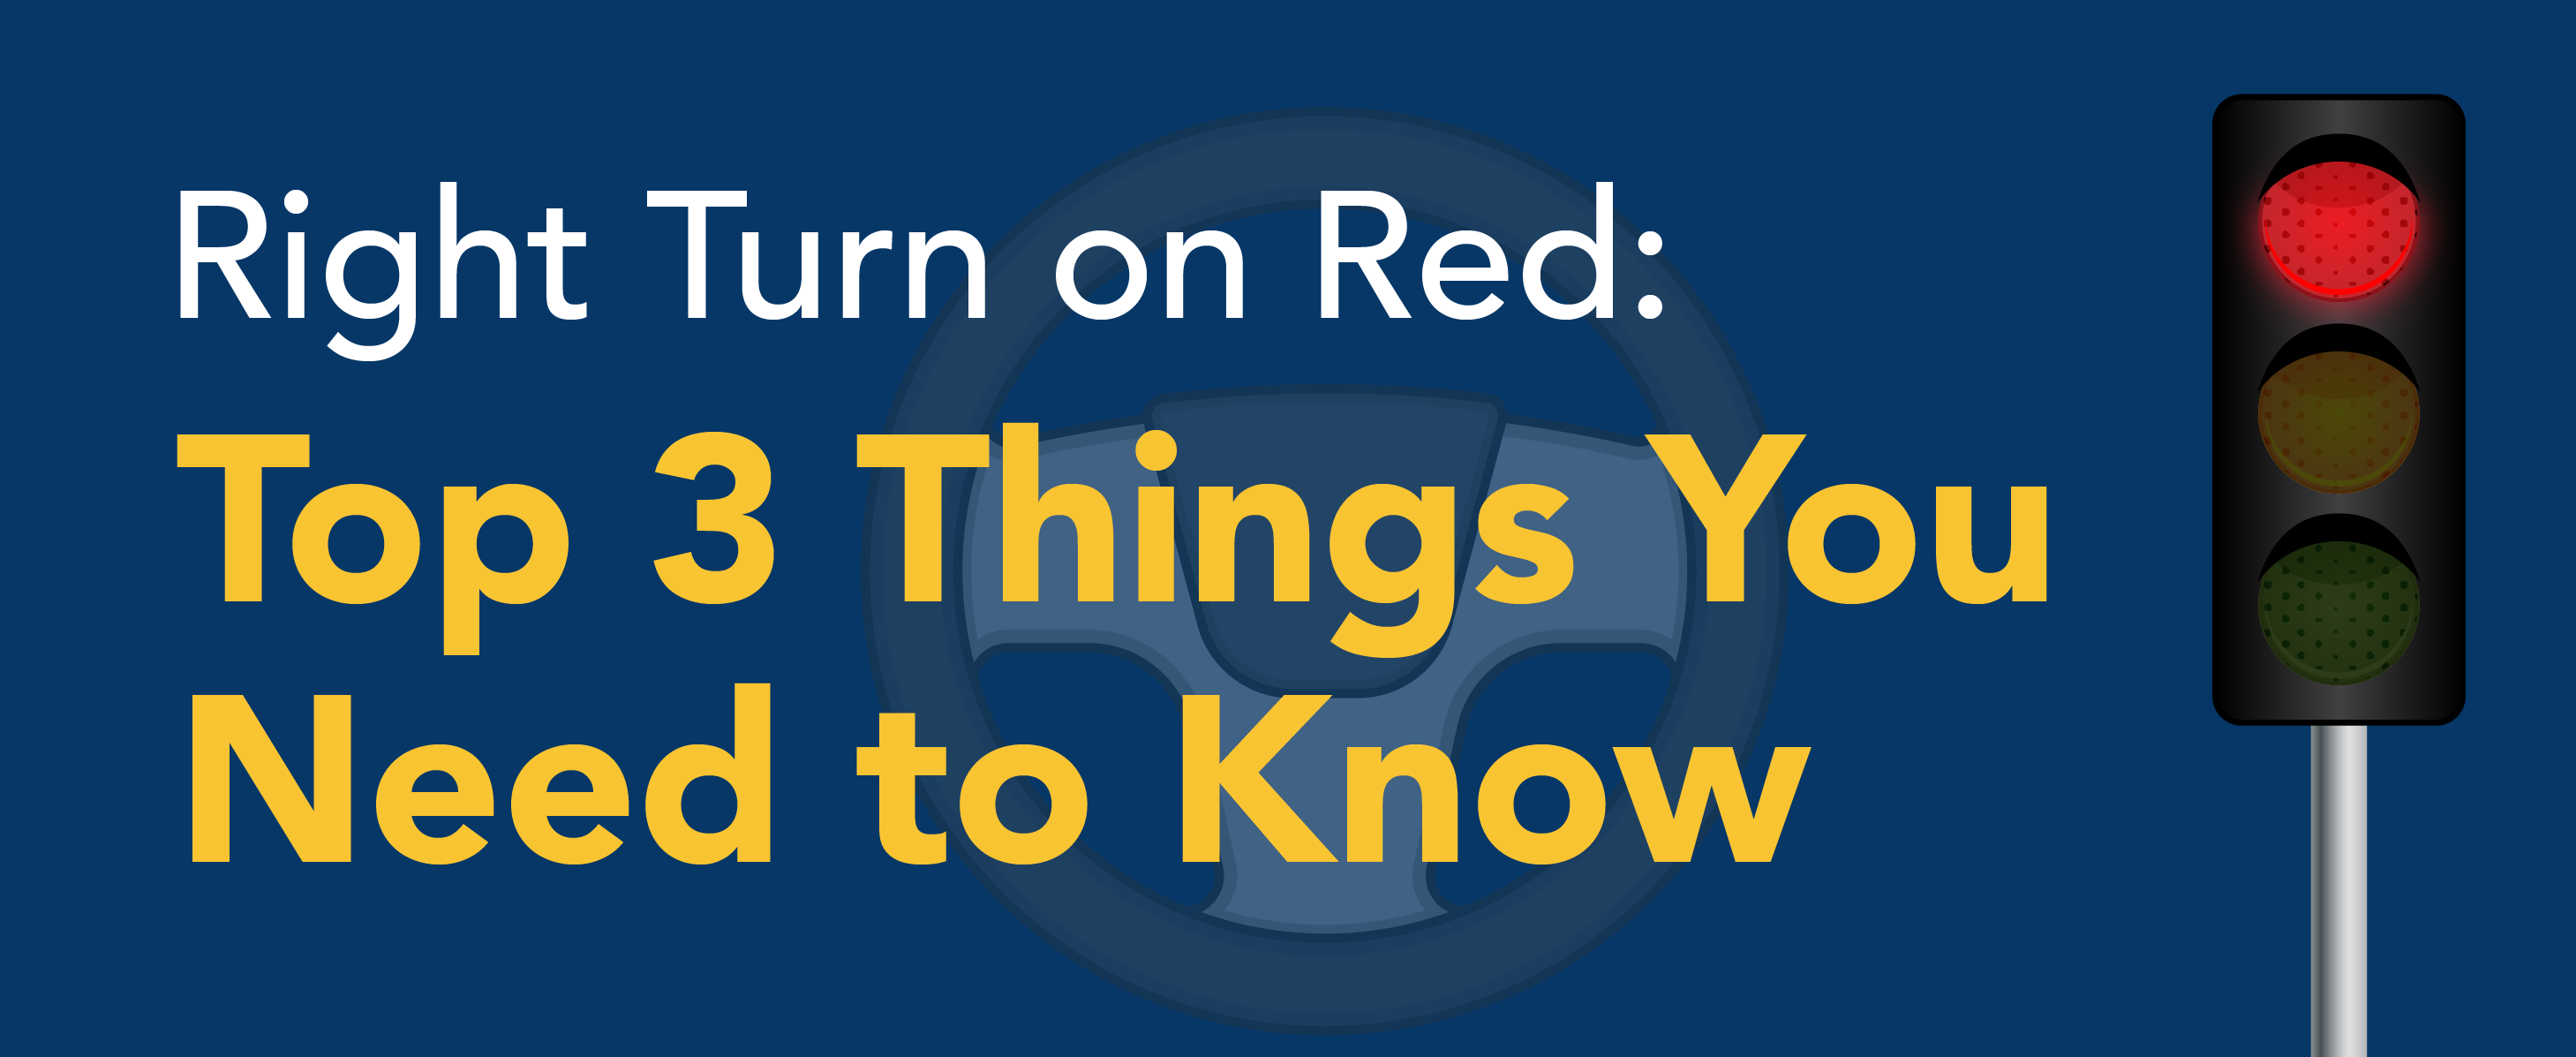 Right Turn on Red: Top 3 Things You Need to Know *image of stop light*